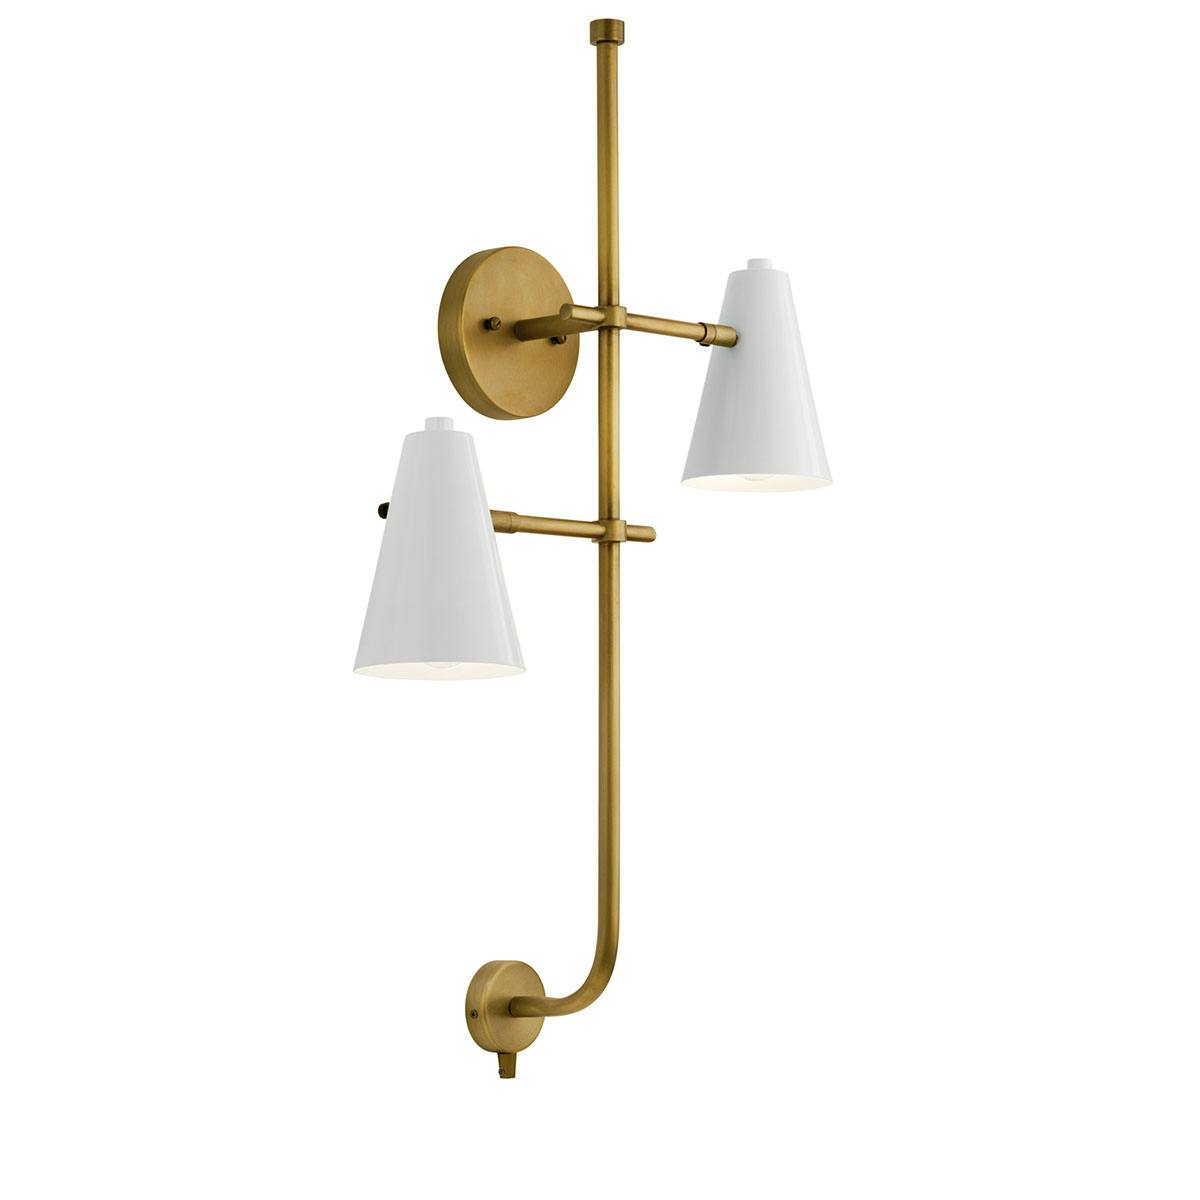 Sylvia 2 Light Sconce White and Brass on a white background